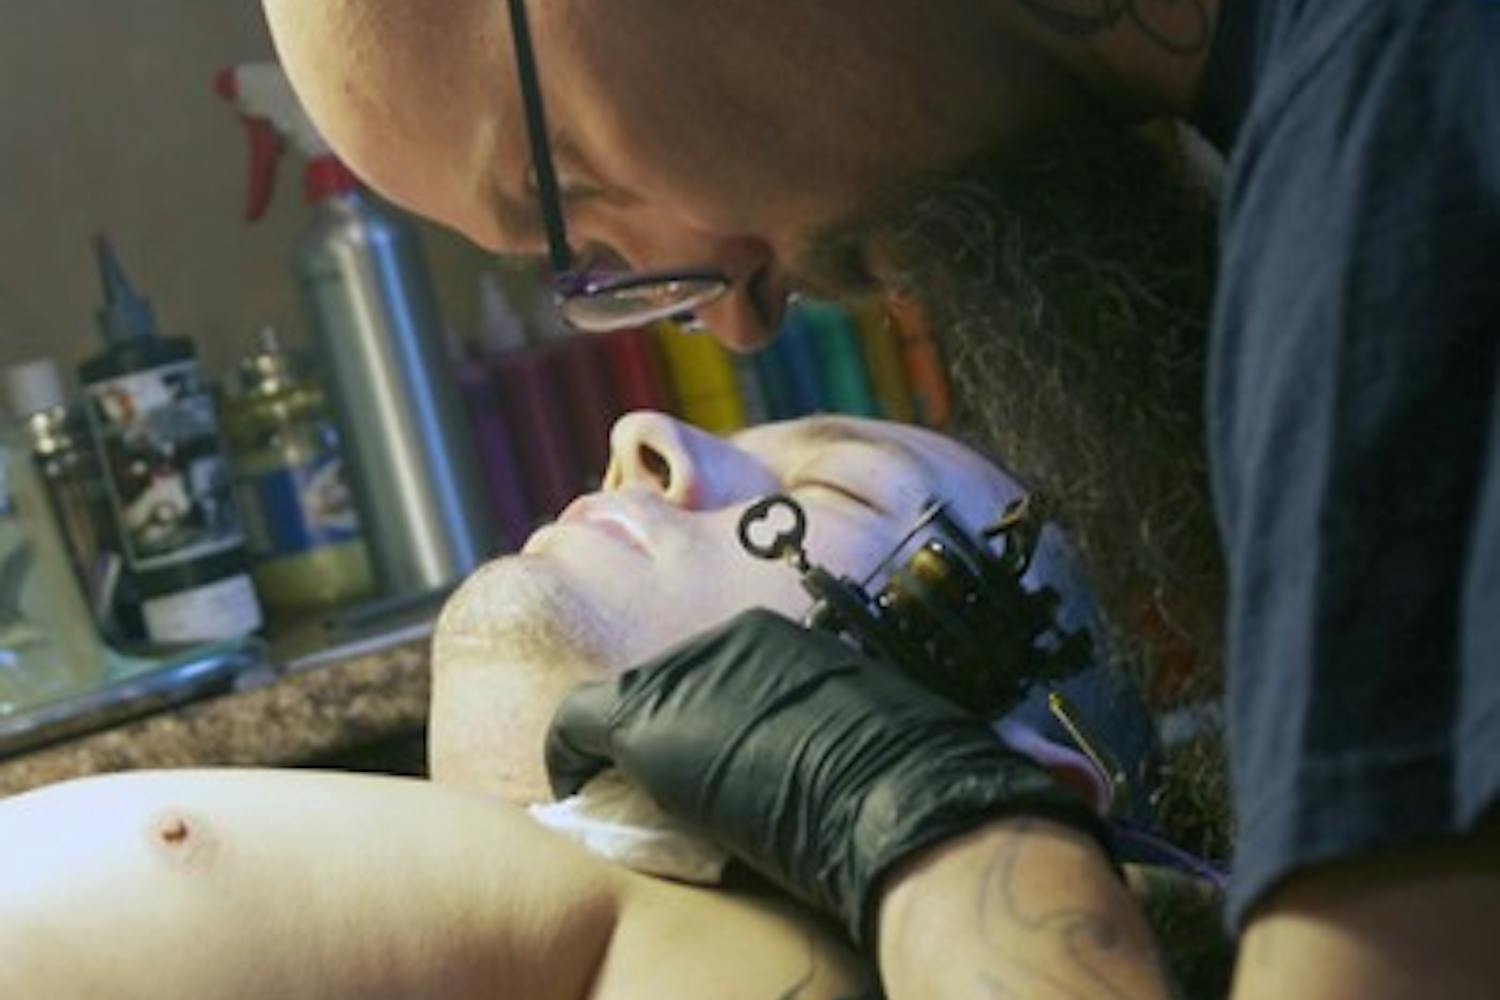 FREE SPEECH ART: Nathan Rios gets a tattoo done across his chest by Living Canvas Tattoo artist, Chris Parrish. The issue of whether tattoos are protected under the First Amendment right of freedom of speech has long been debated by Constitutional experts. (Photo by Shawn Raymundo)